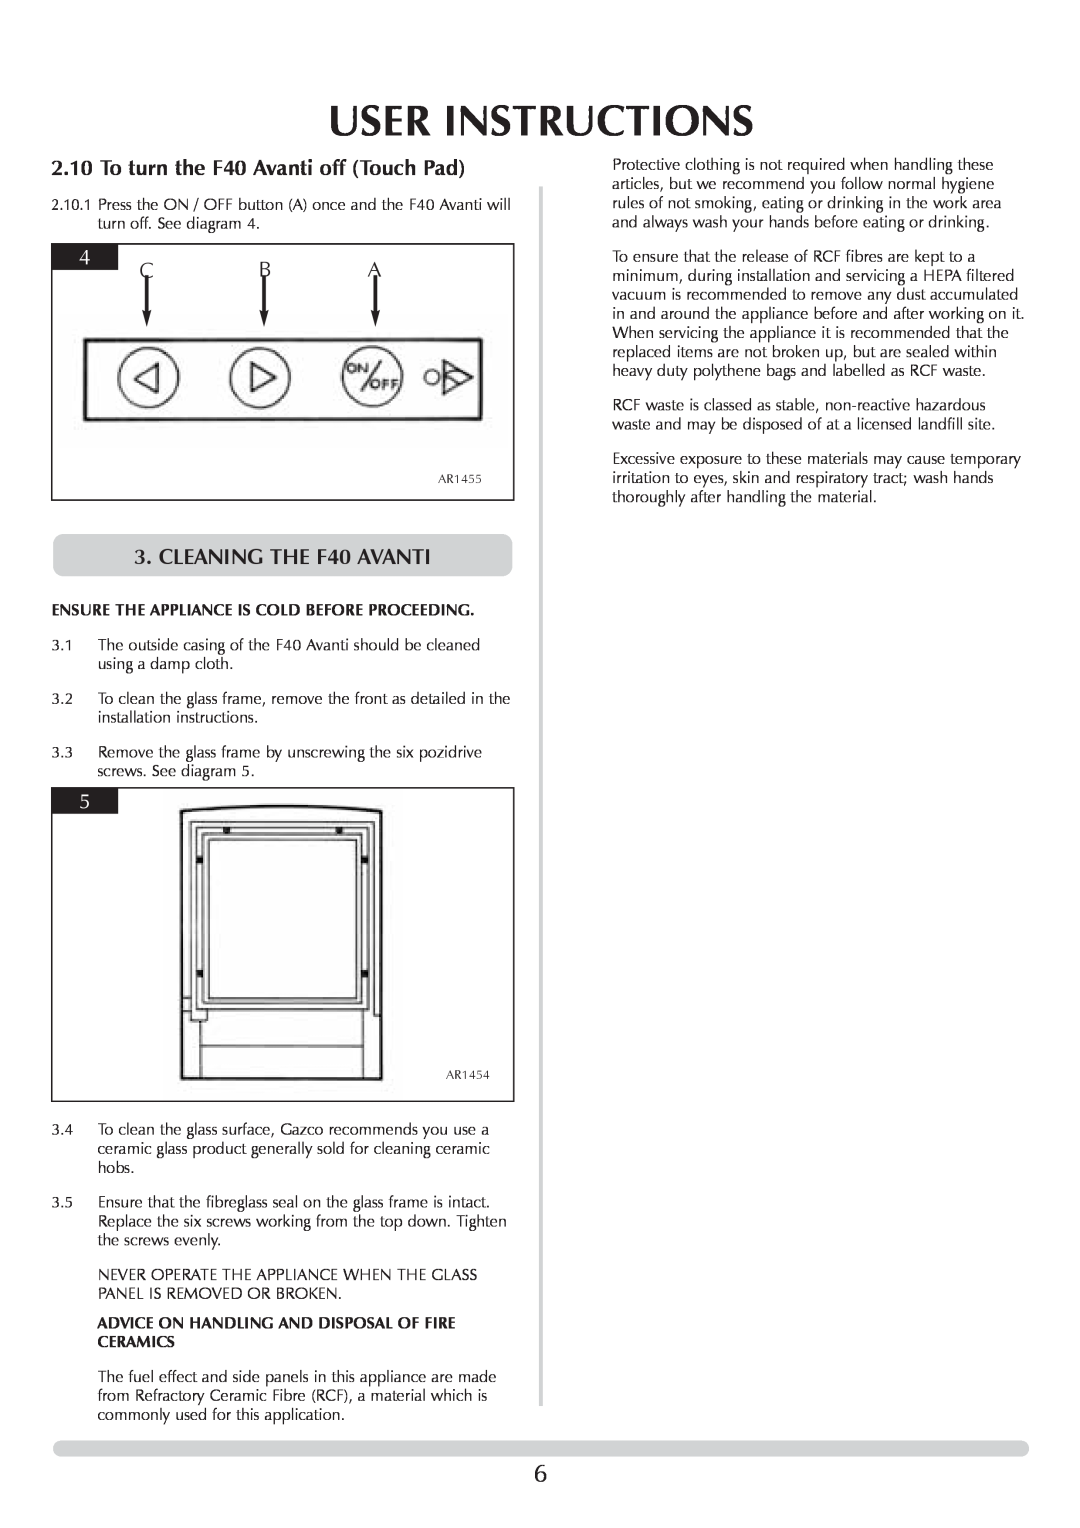 Stovax manual To turn the F40 Avanti off Touch Pad, CLEANING THE F40 AVANTI, User Instructions 